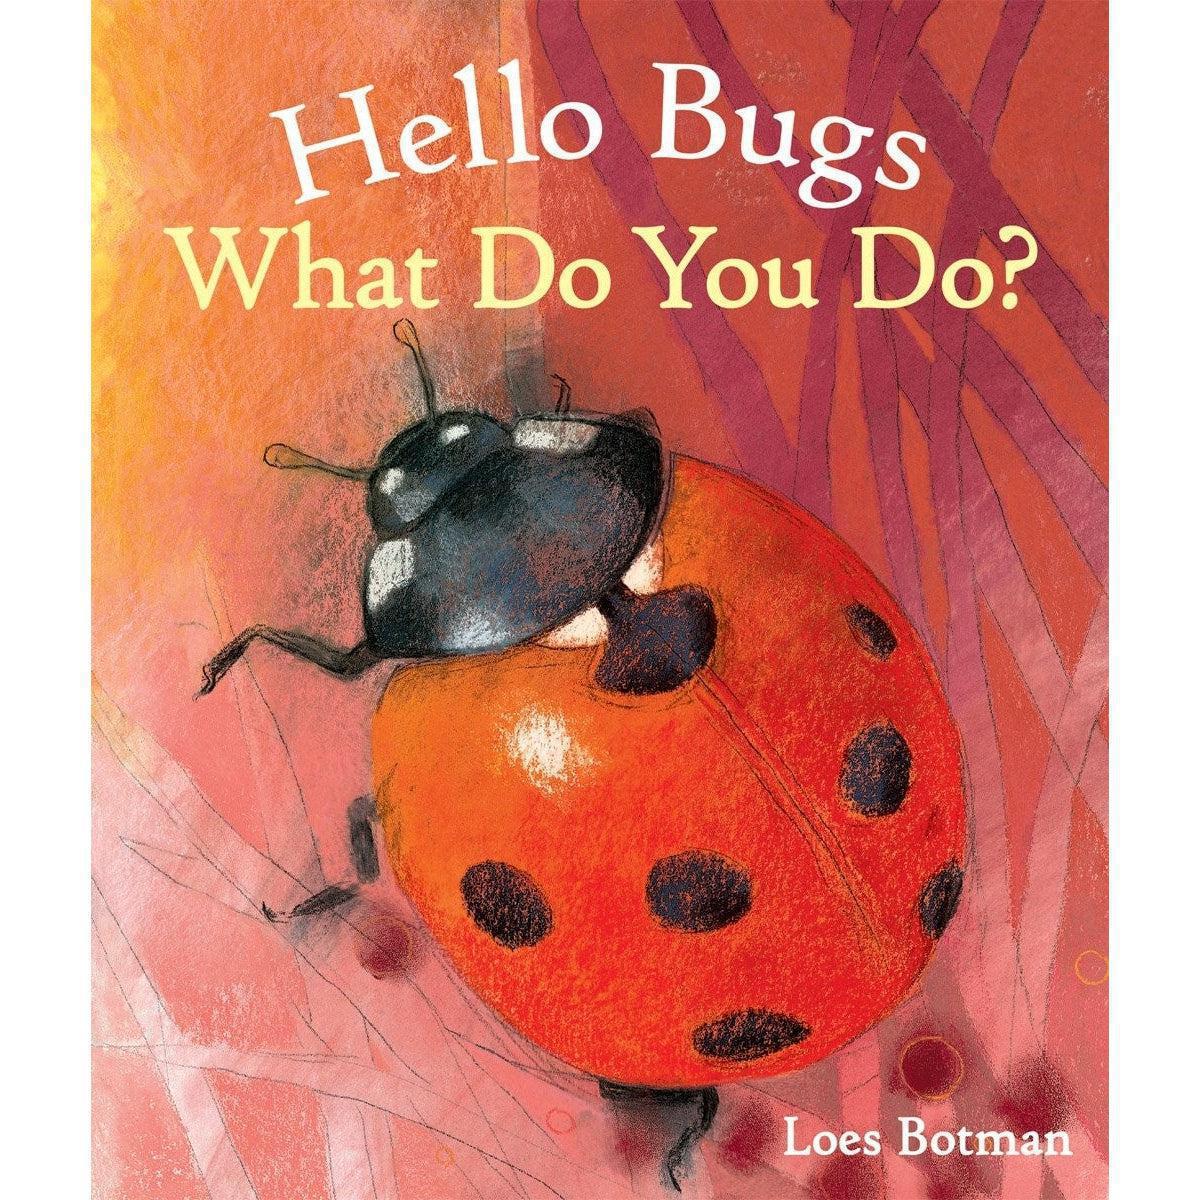 Hello Bugs What Do You Do? - Loes Botman